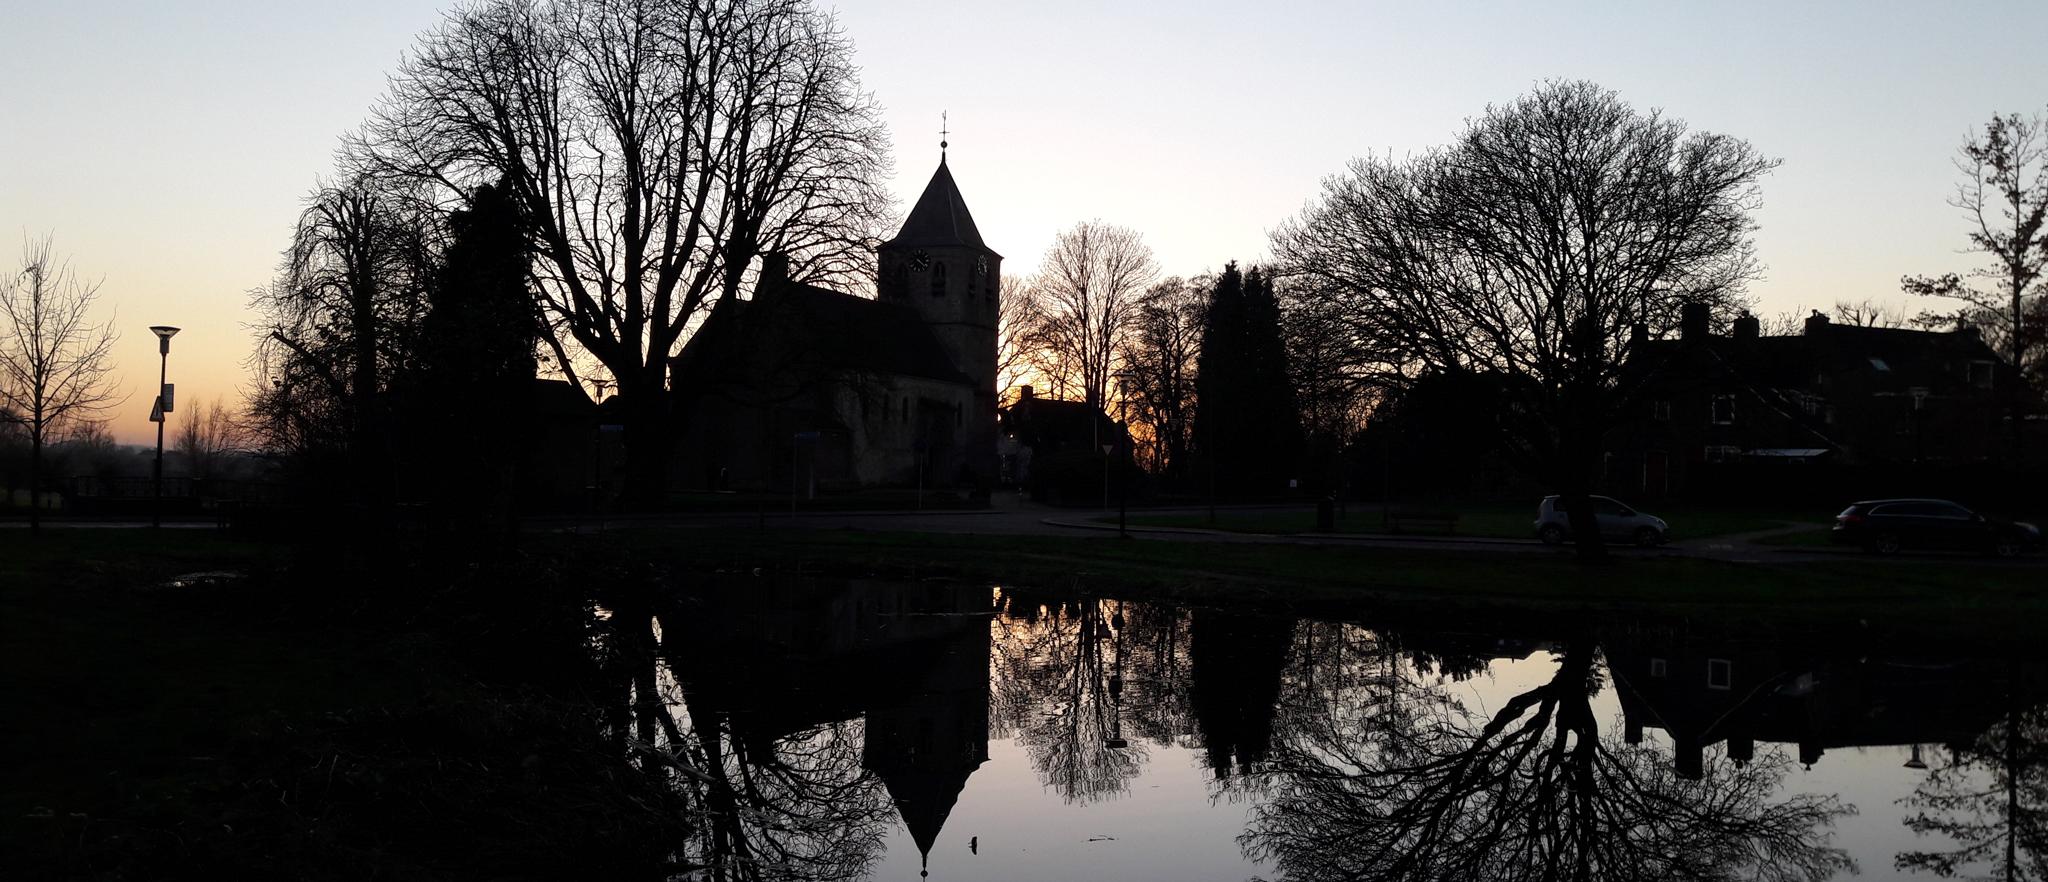 Sunset at Oosterbeek. The protestant church in the centre is one of the oldest in The Netherlands.